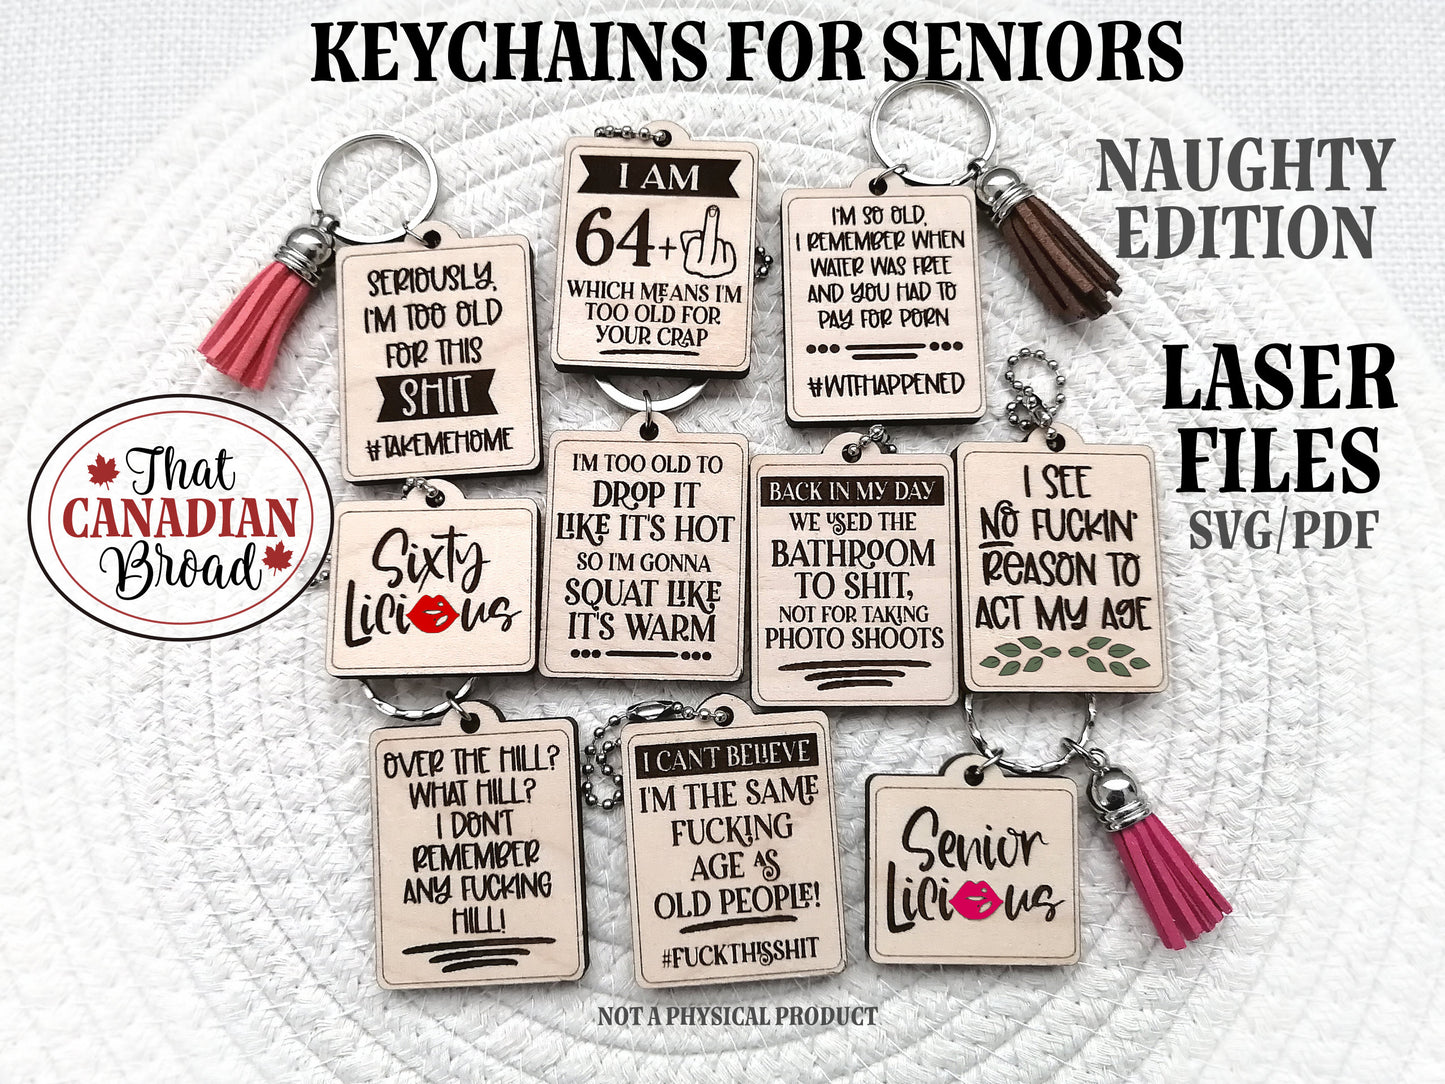 Keychains For Seniors Naughty Edition, 10 designs, Inappropriate, senior humor, senior humour, funny keychains, laser file, SVG PDF